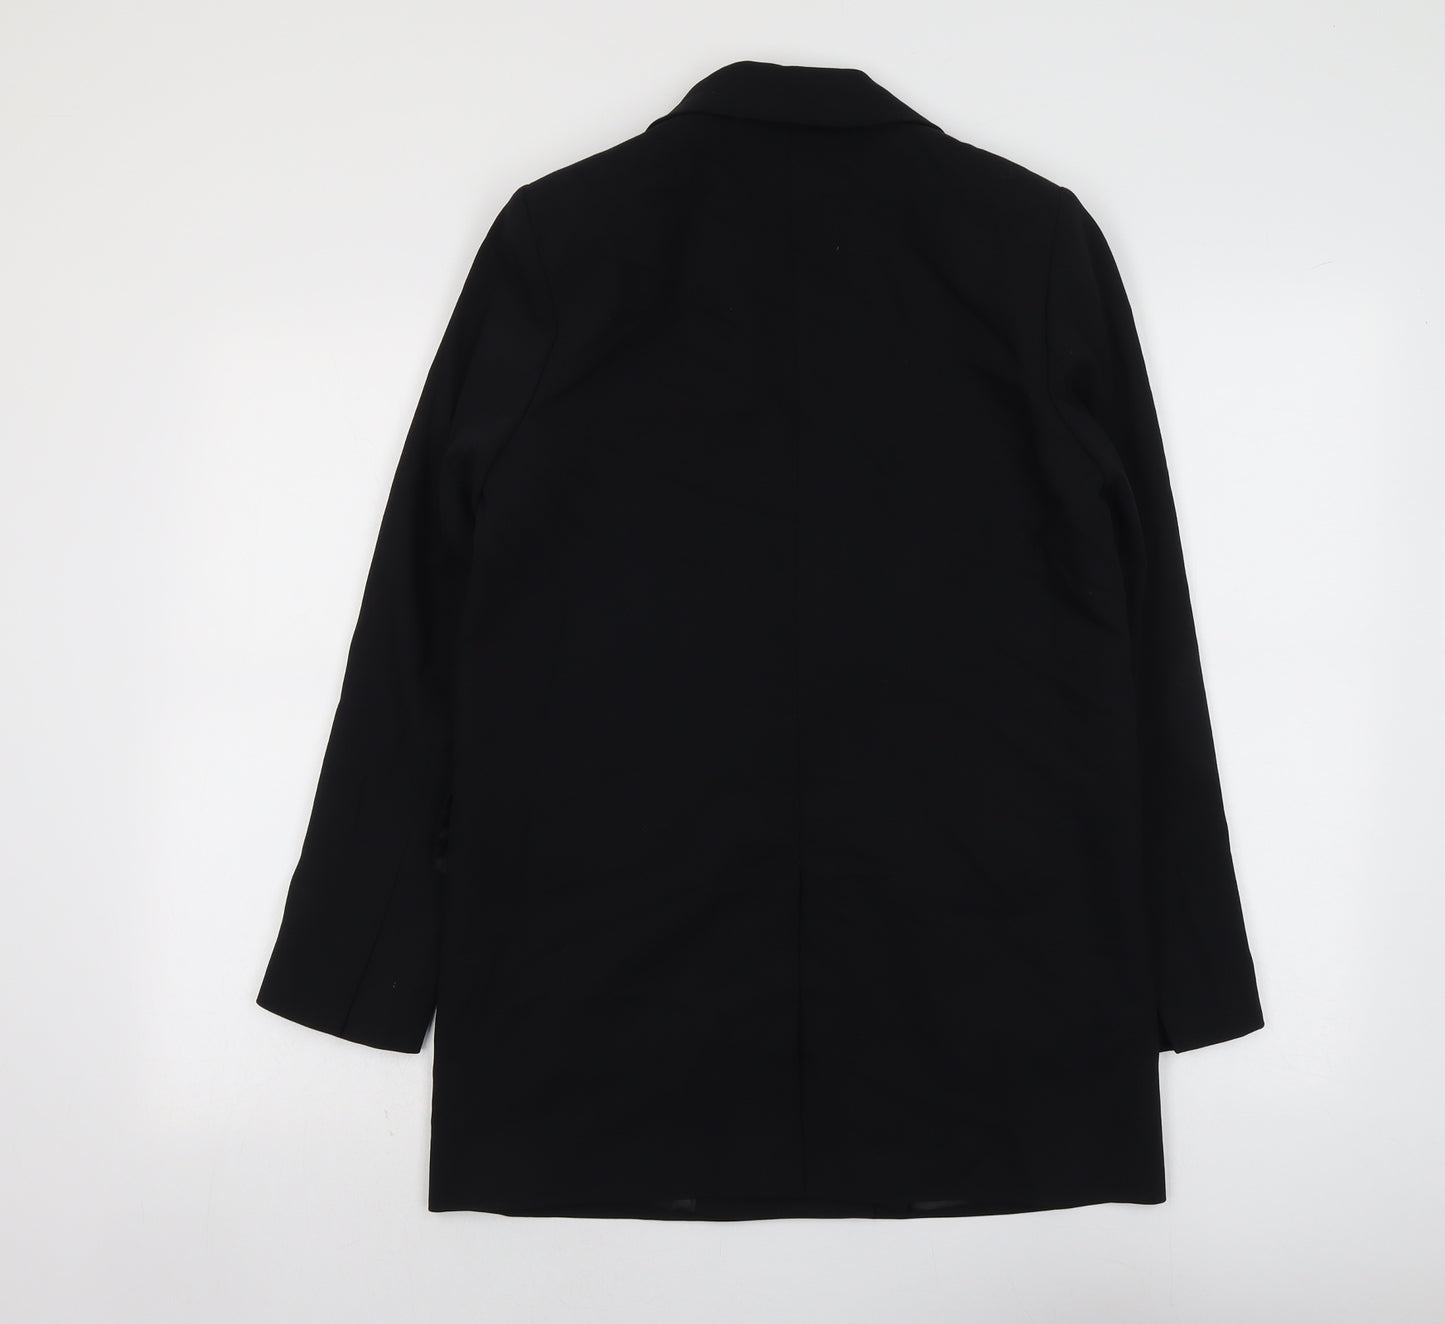 Marks and Spencer Womens Black Polyester Jacket Suit Jacket Size 8